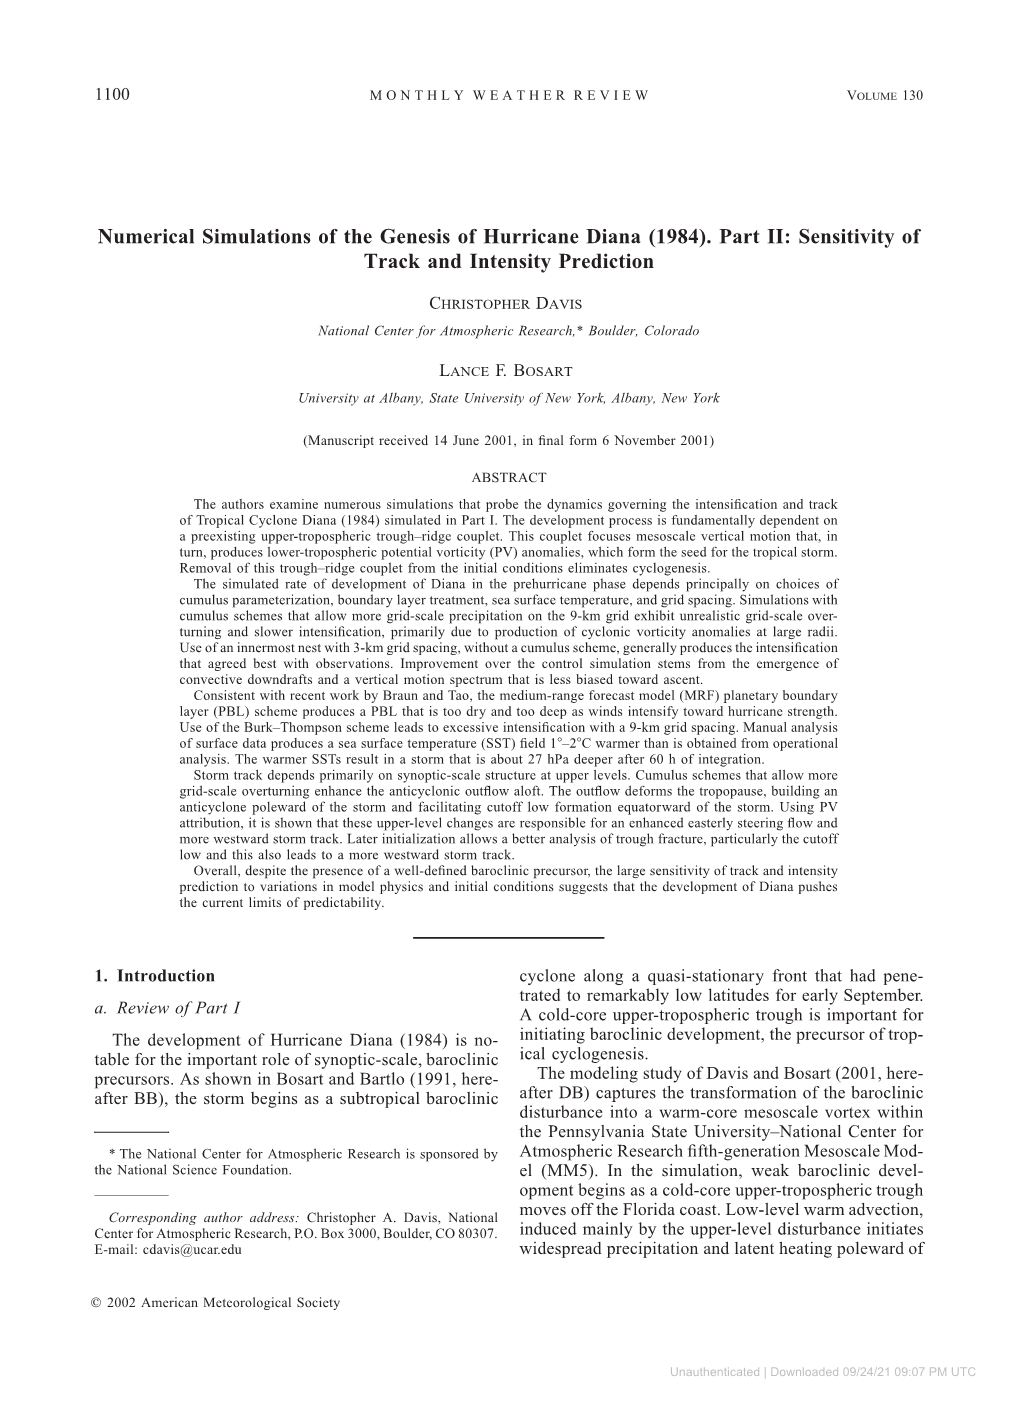 Numerical Simulations of the Genesis of Hurricane Diana (1984)